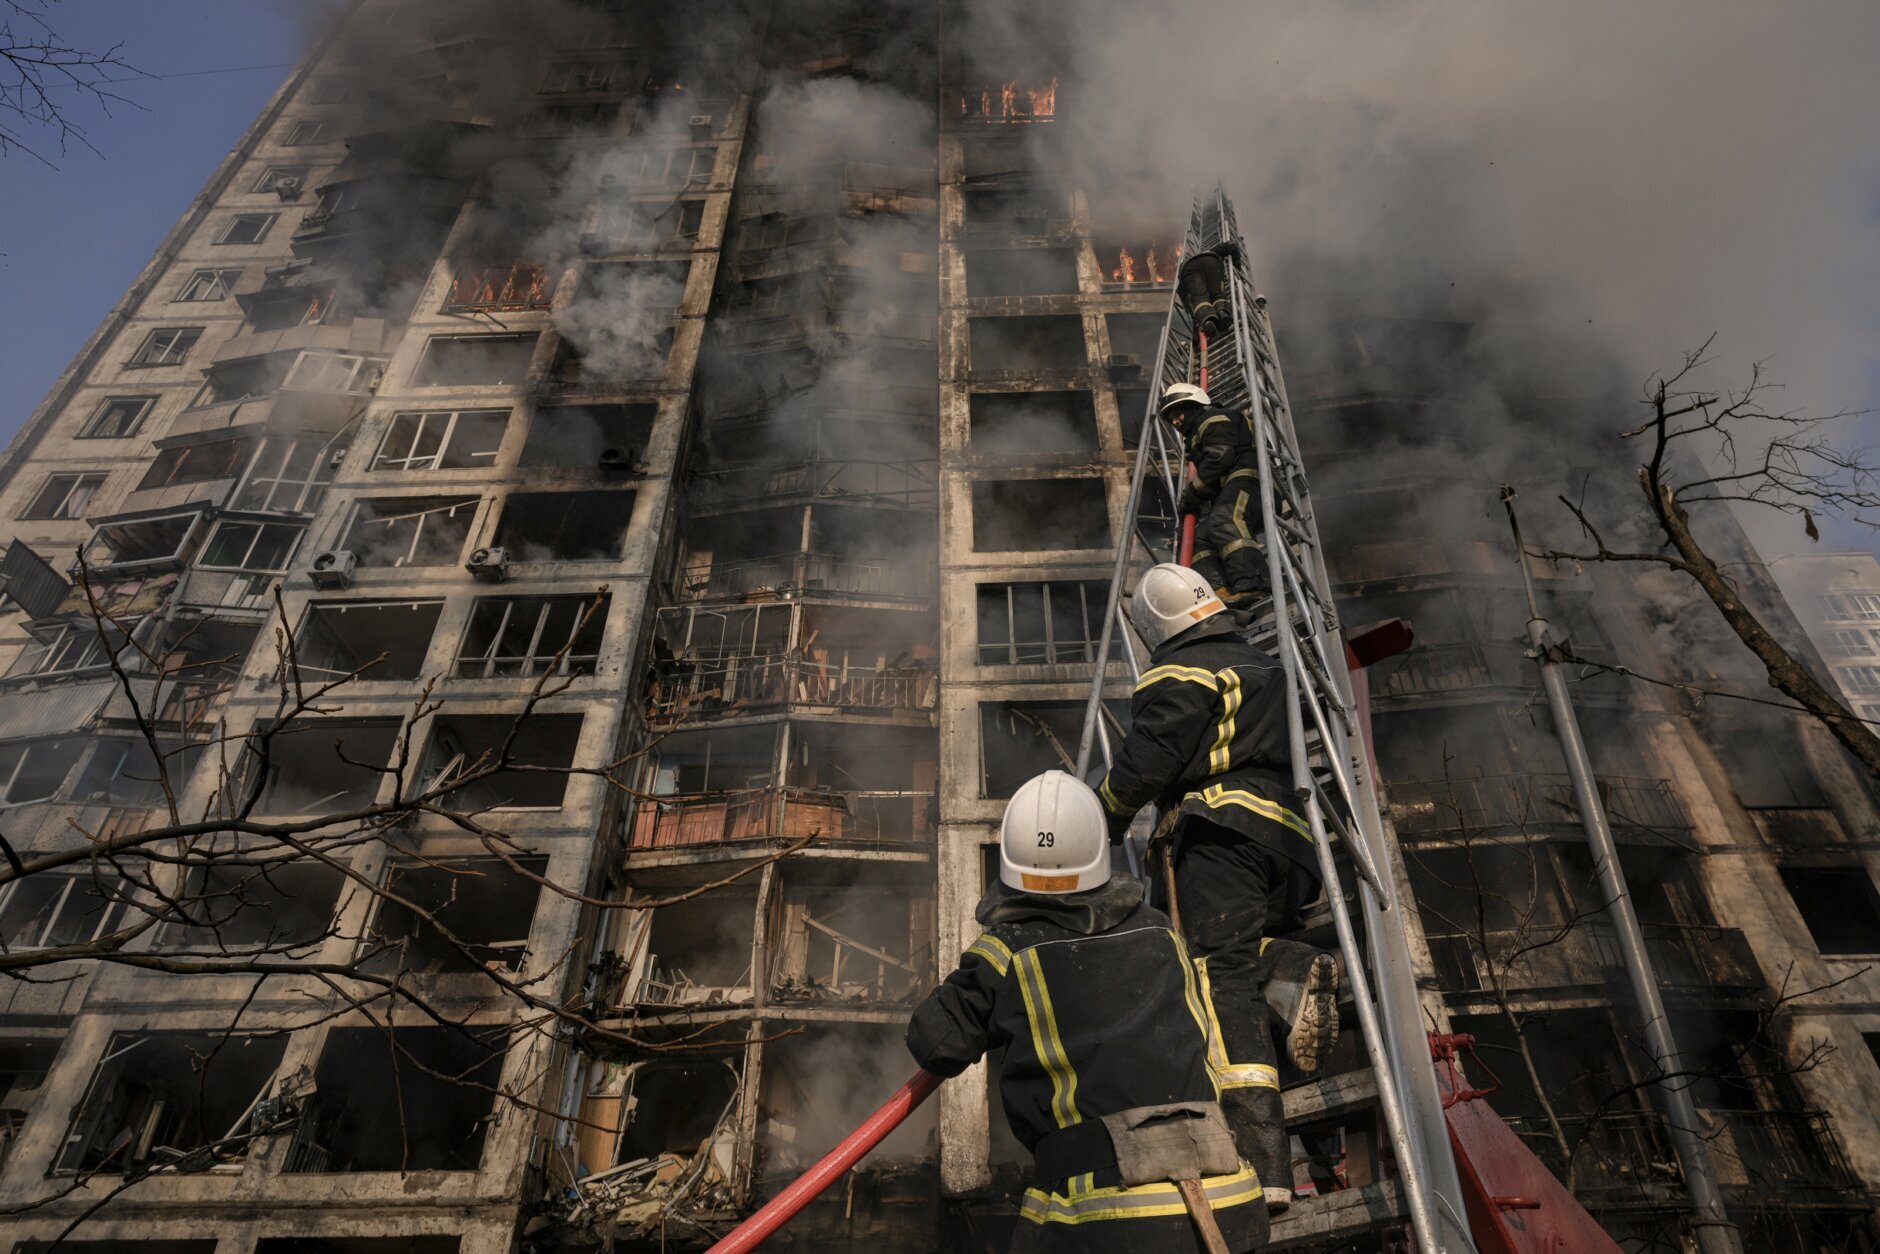 Firefighters climb a ladder while working to extinguish a blaze in a destroyed apartment building after a bombing in a residential area in Kyiv, Ukraine, Tuesday, March 15, 2022. (AP Photo/Vadim Ghirda)